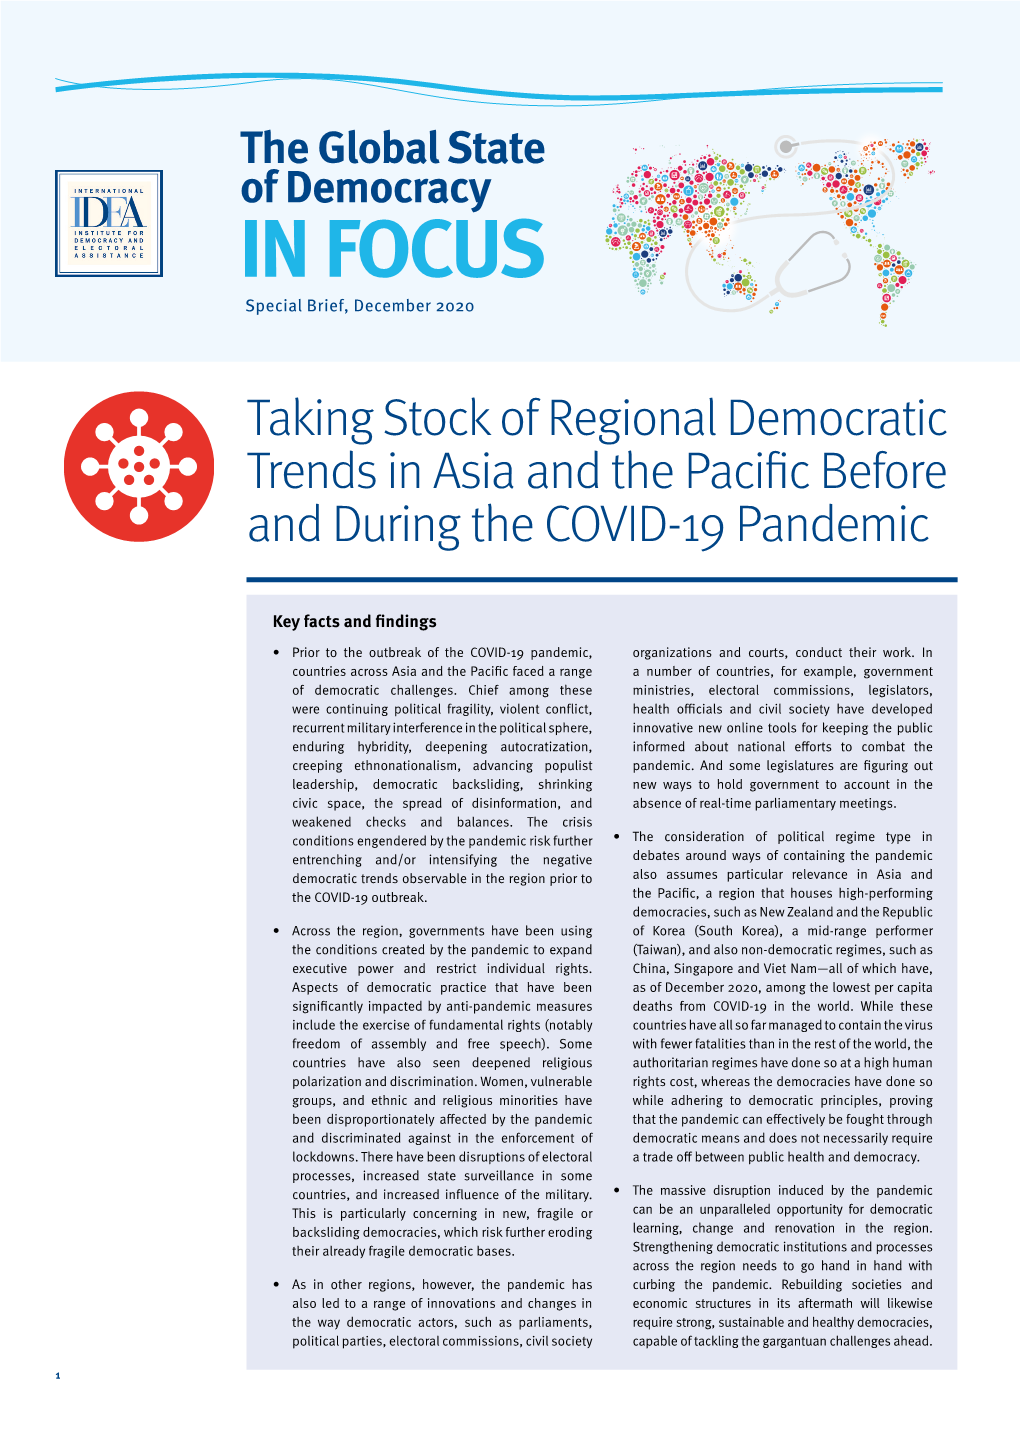 Taking Stock of Regional Democratic Trends in Asia and the Pacific